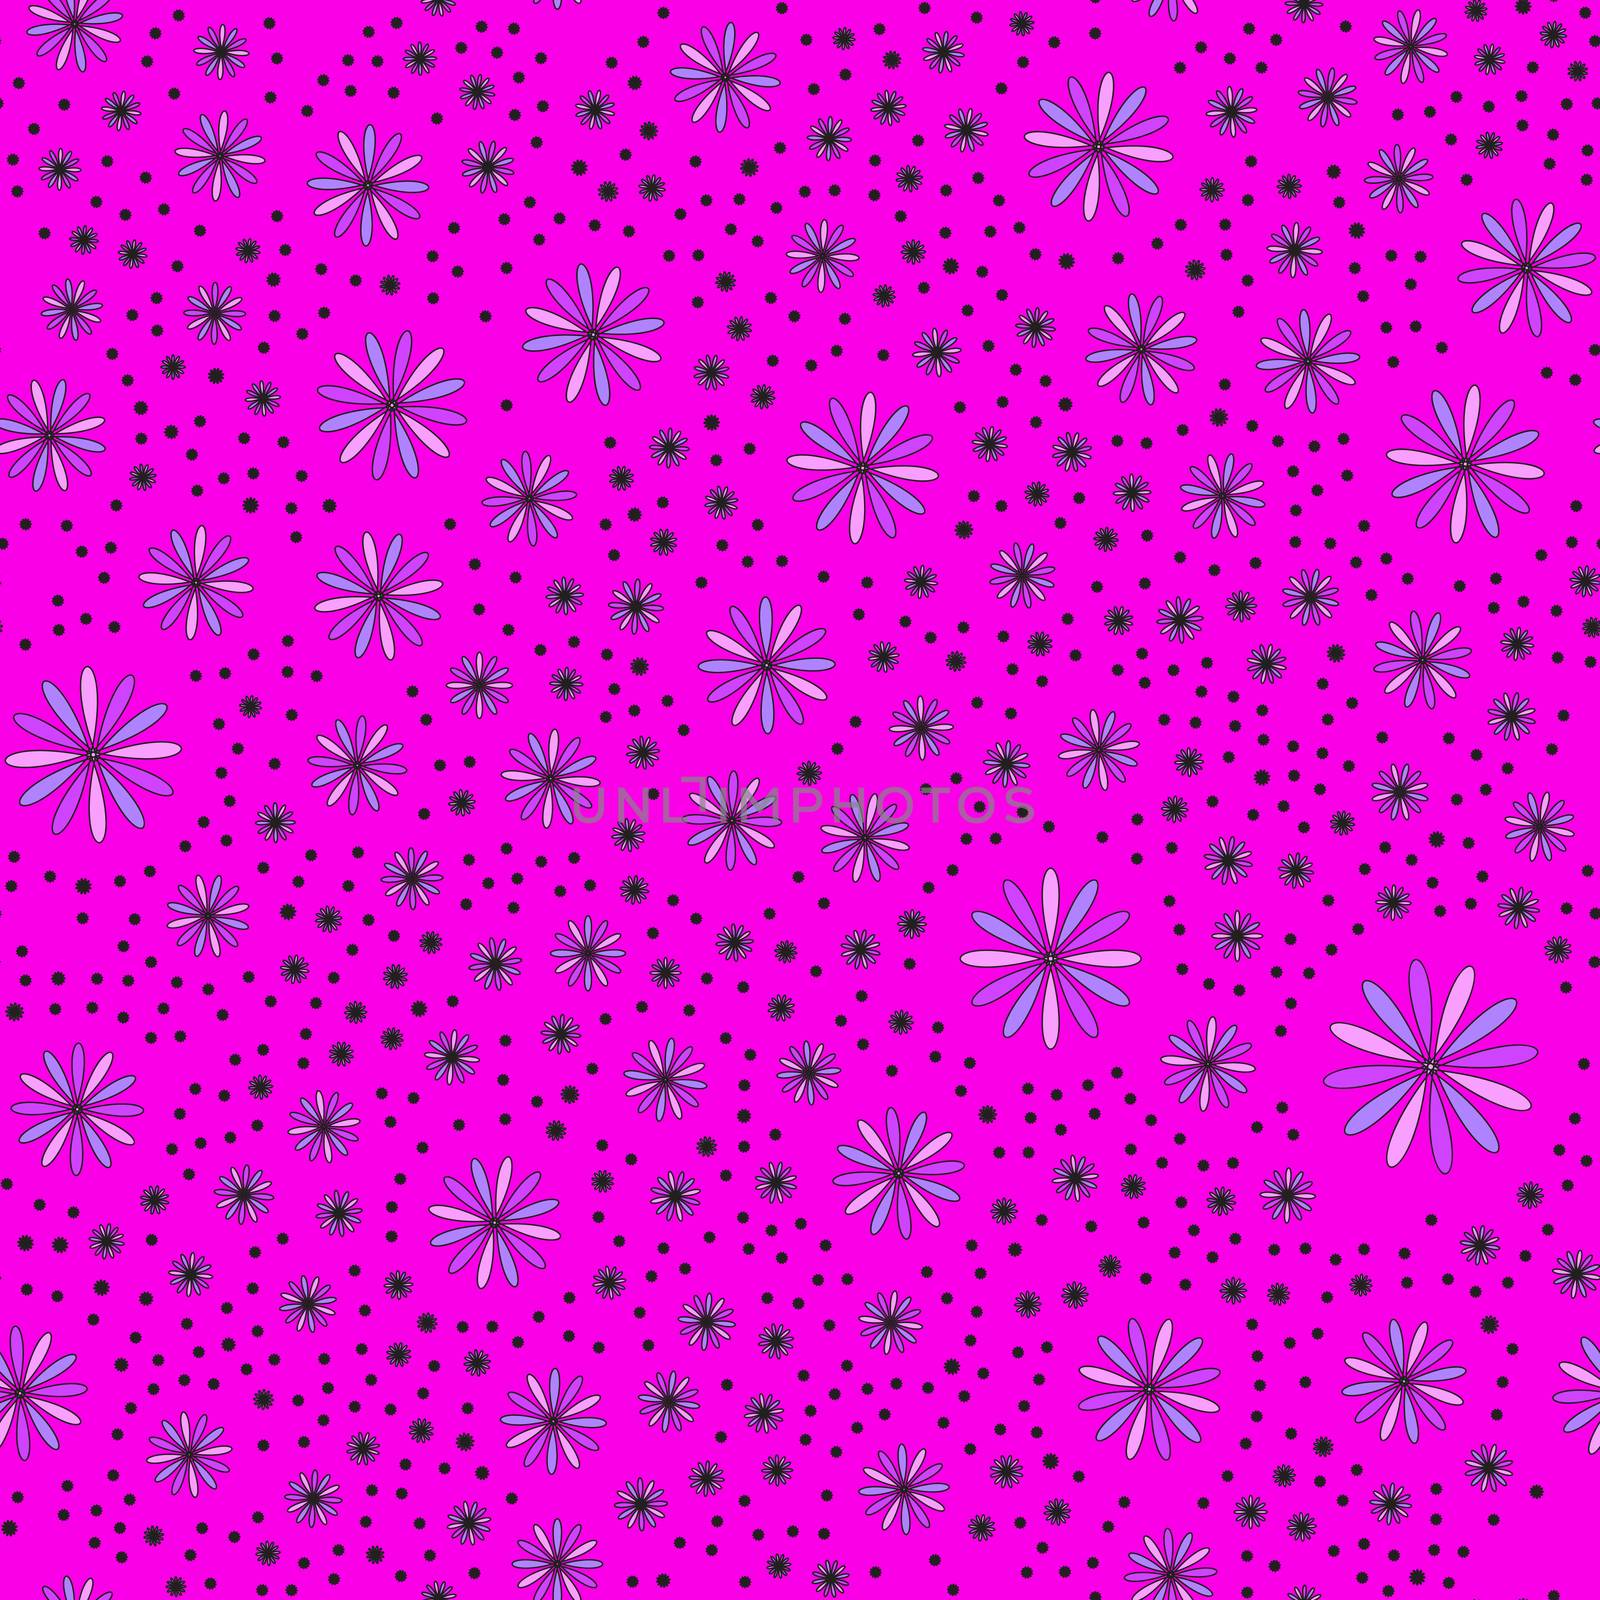 Floral vector seamless pattern on the pink background